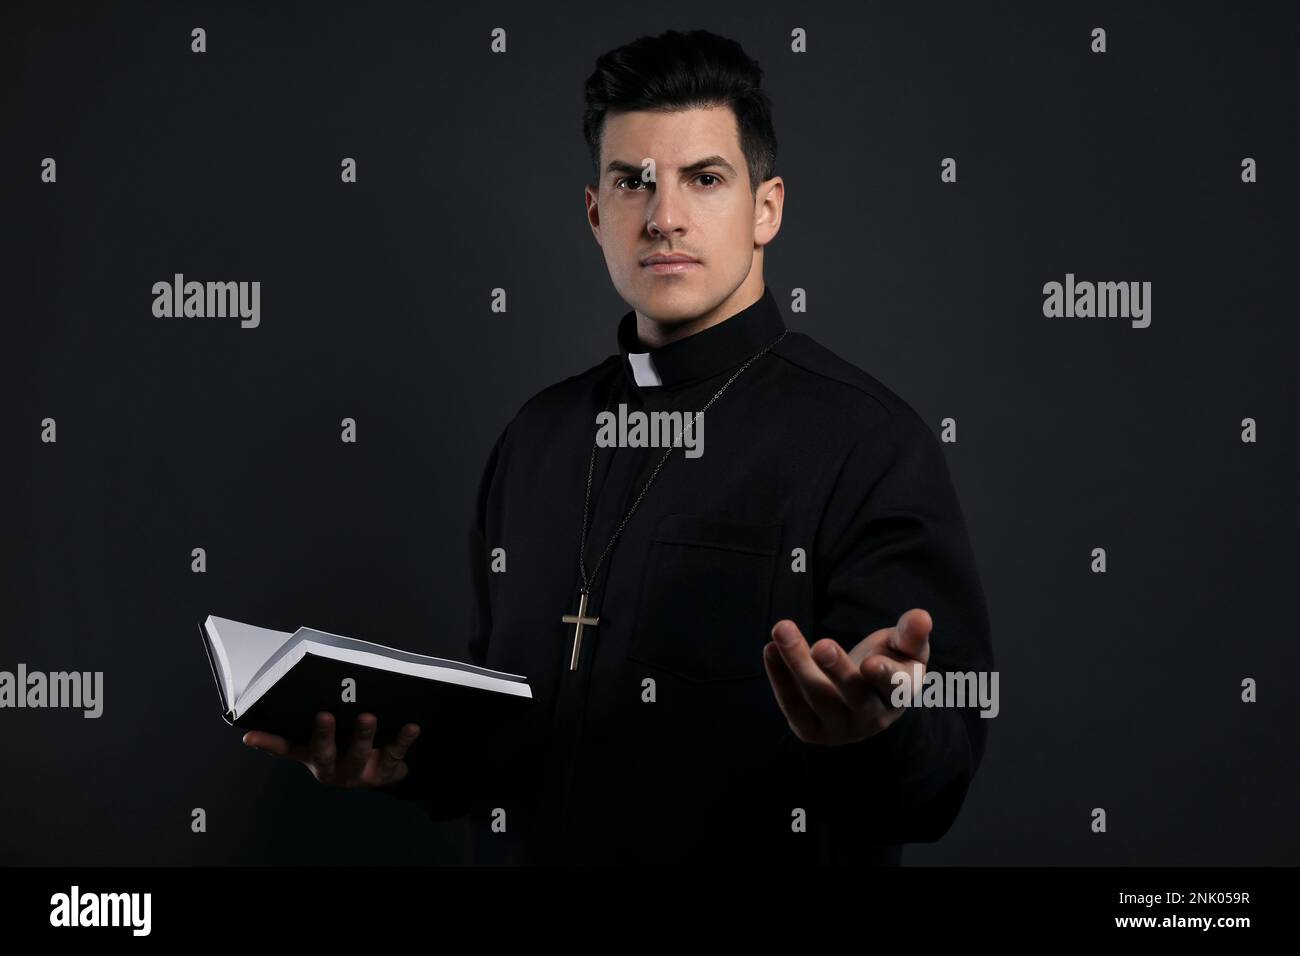 Priest in cassock with Bible on black background Stock Photo